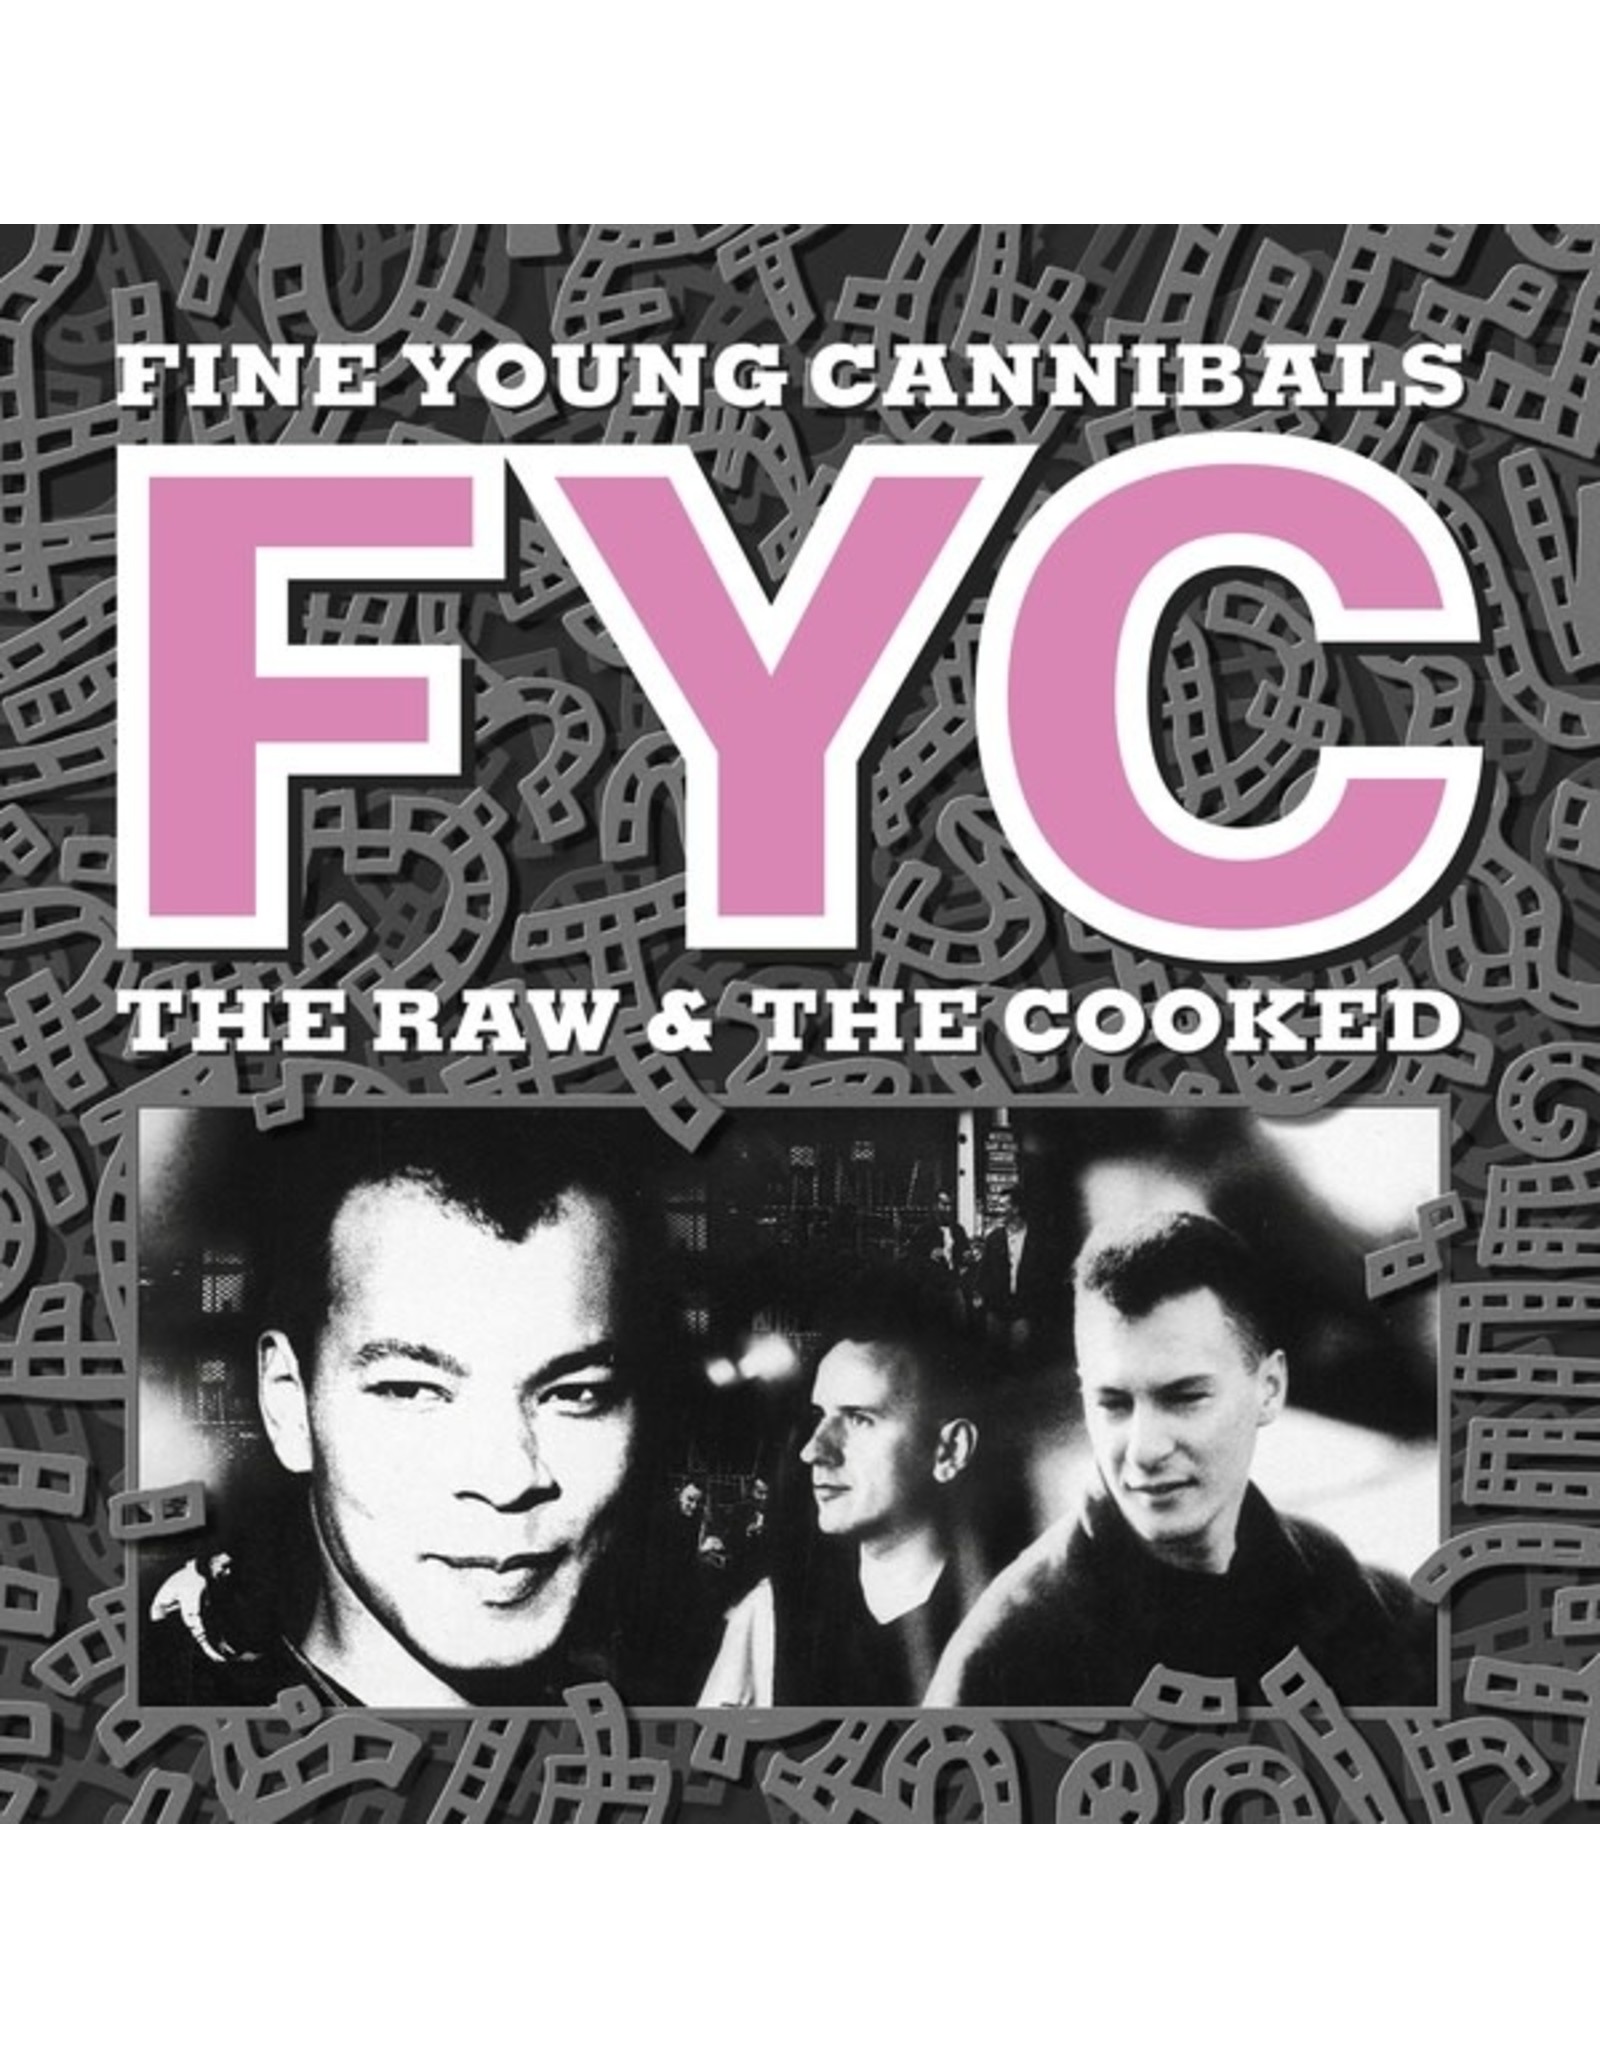 New Vinyl Fine Young Cannibals - The Raw and The Cooked (Remastered, Colored) LP